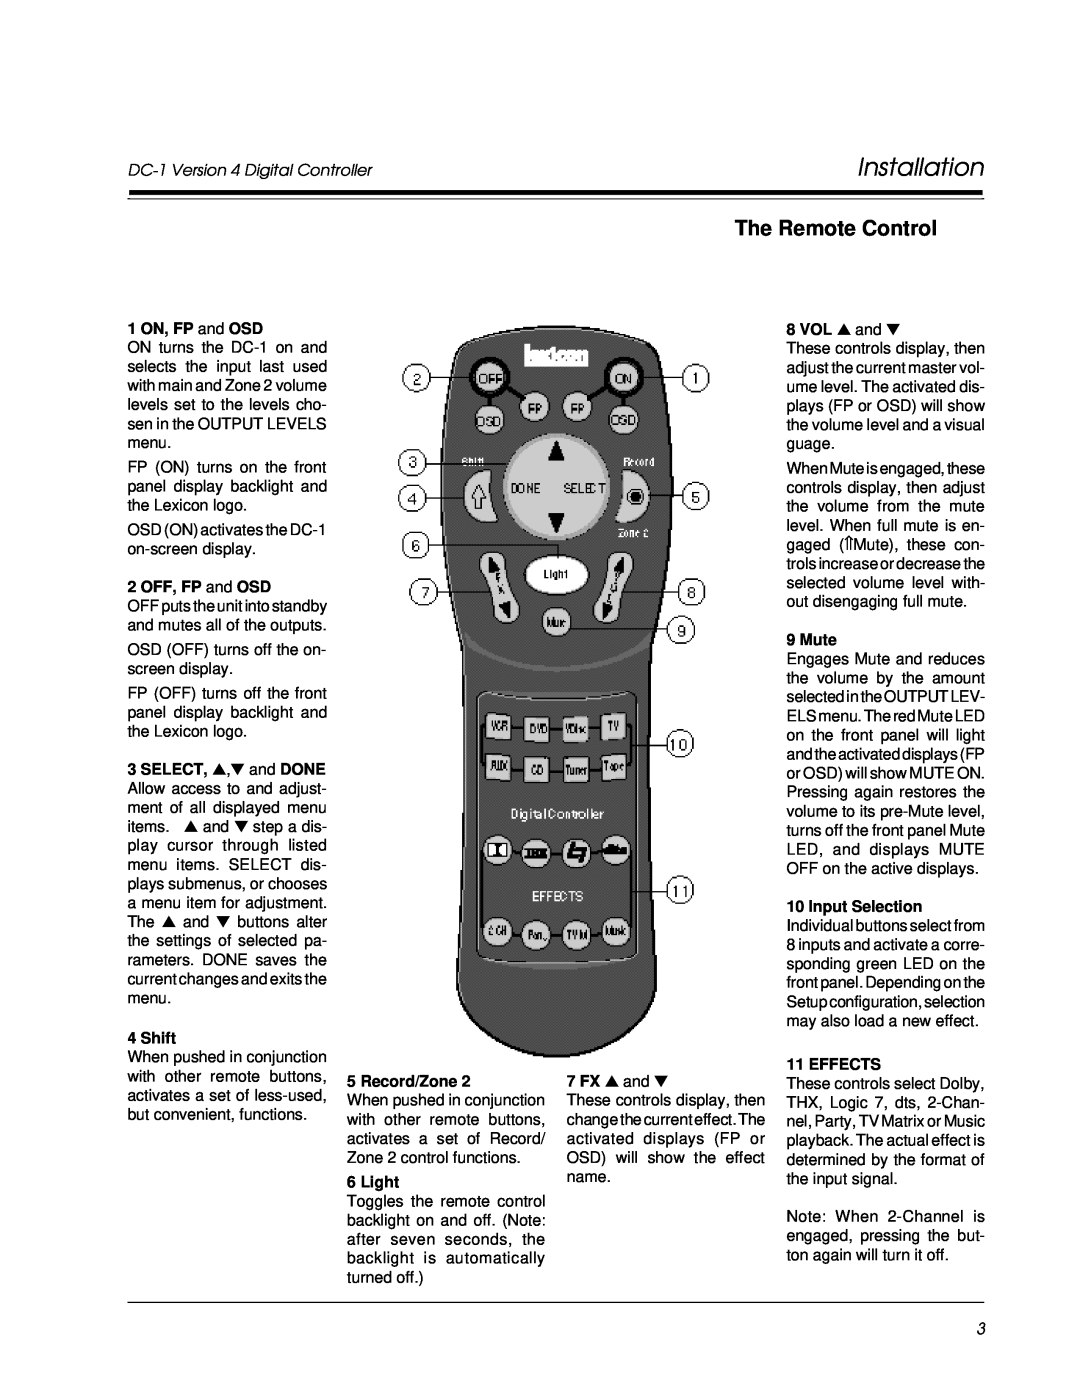 Lexicon Lexicon Part #070-13234 The Remote Control, Installation, DC-1Version 4 Digital Controller, 1 ON, FP and OSD, Mute 